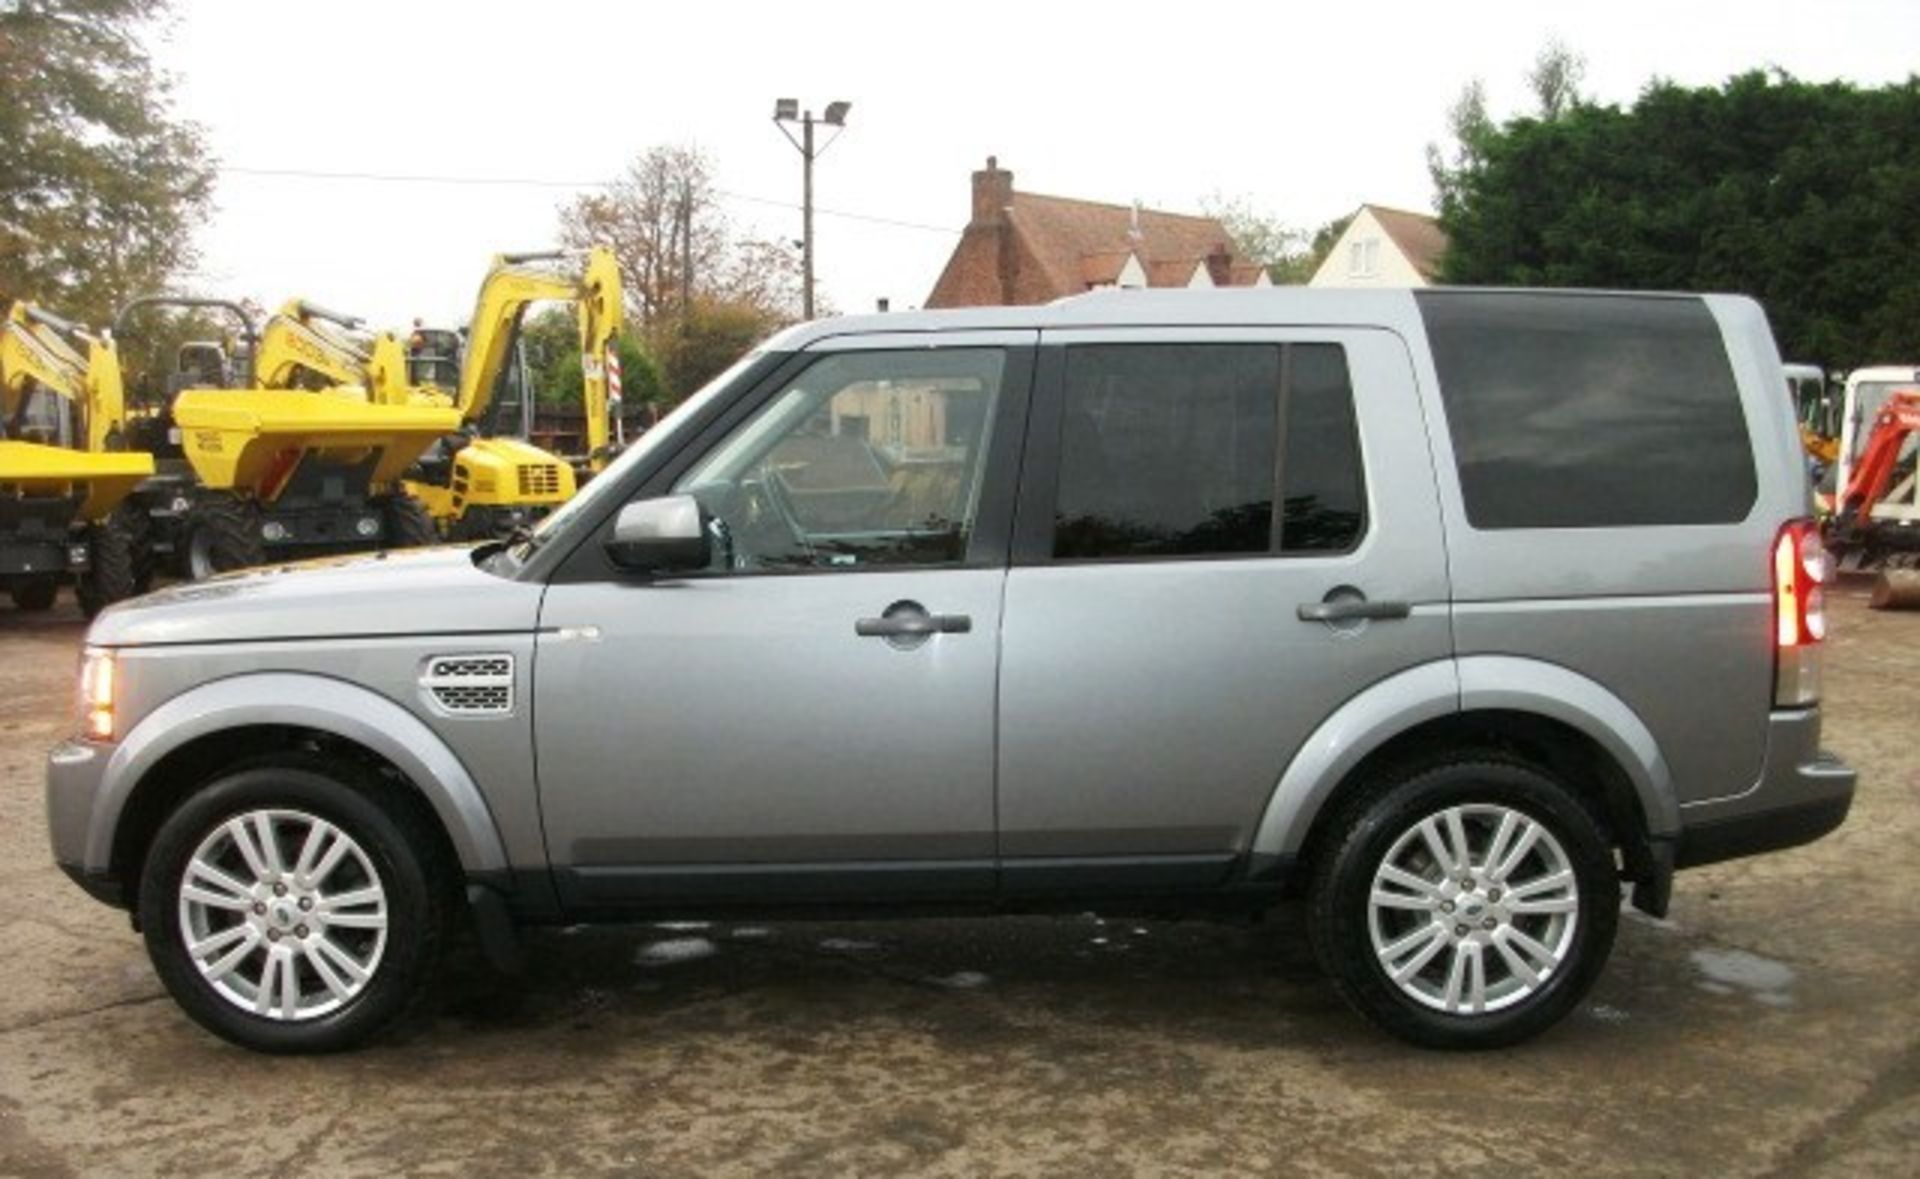 LAND ROVER DISCOVERY SDV6 AUTO 255 - 2993cc
Body: 4 Dr 4x4
Color: Grey
First Reg: 26/04/2013 - Image 28 of 29